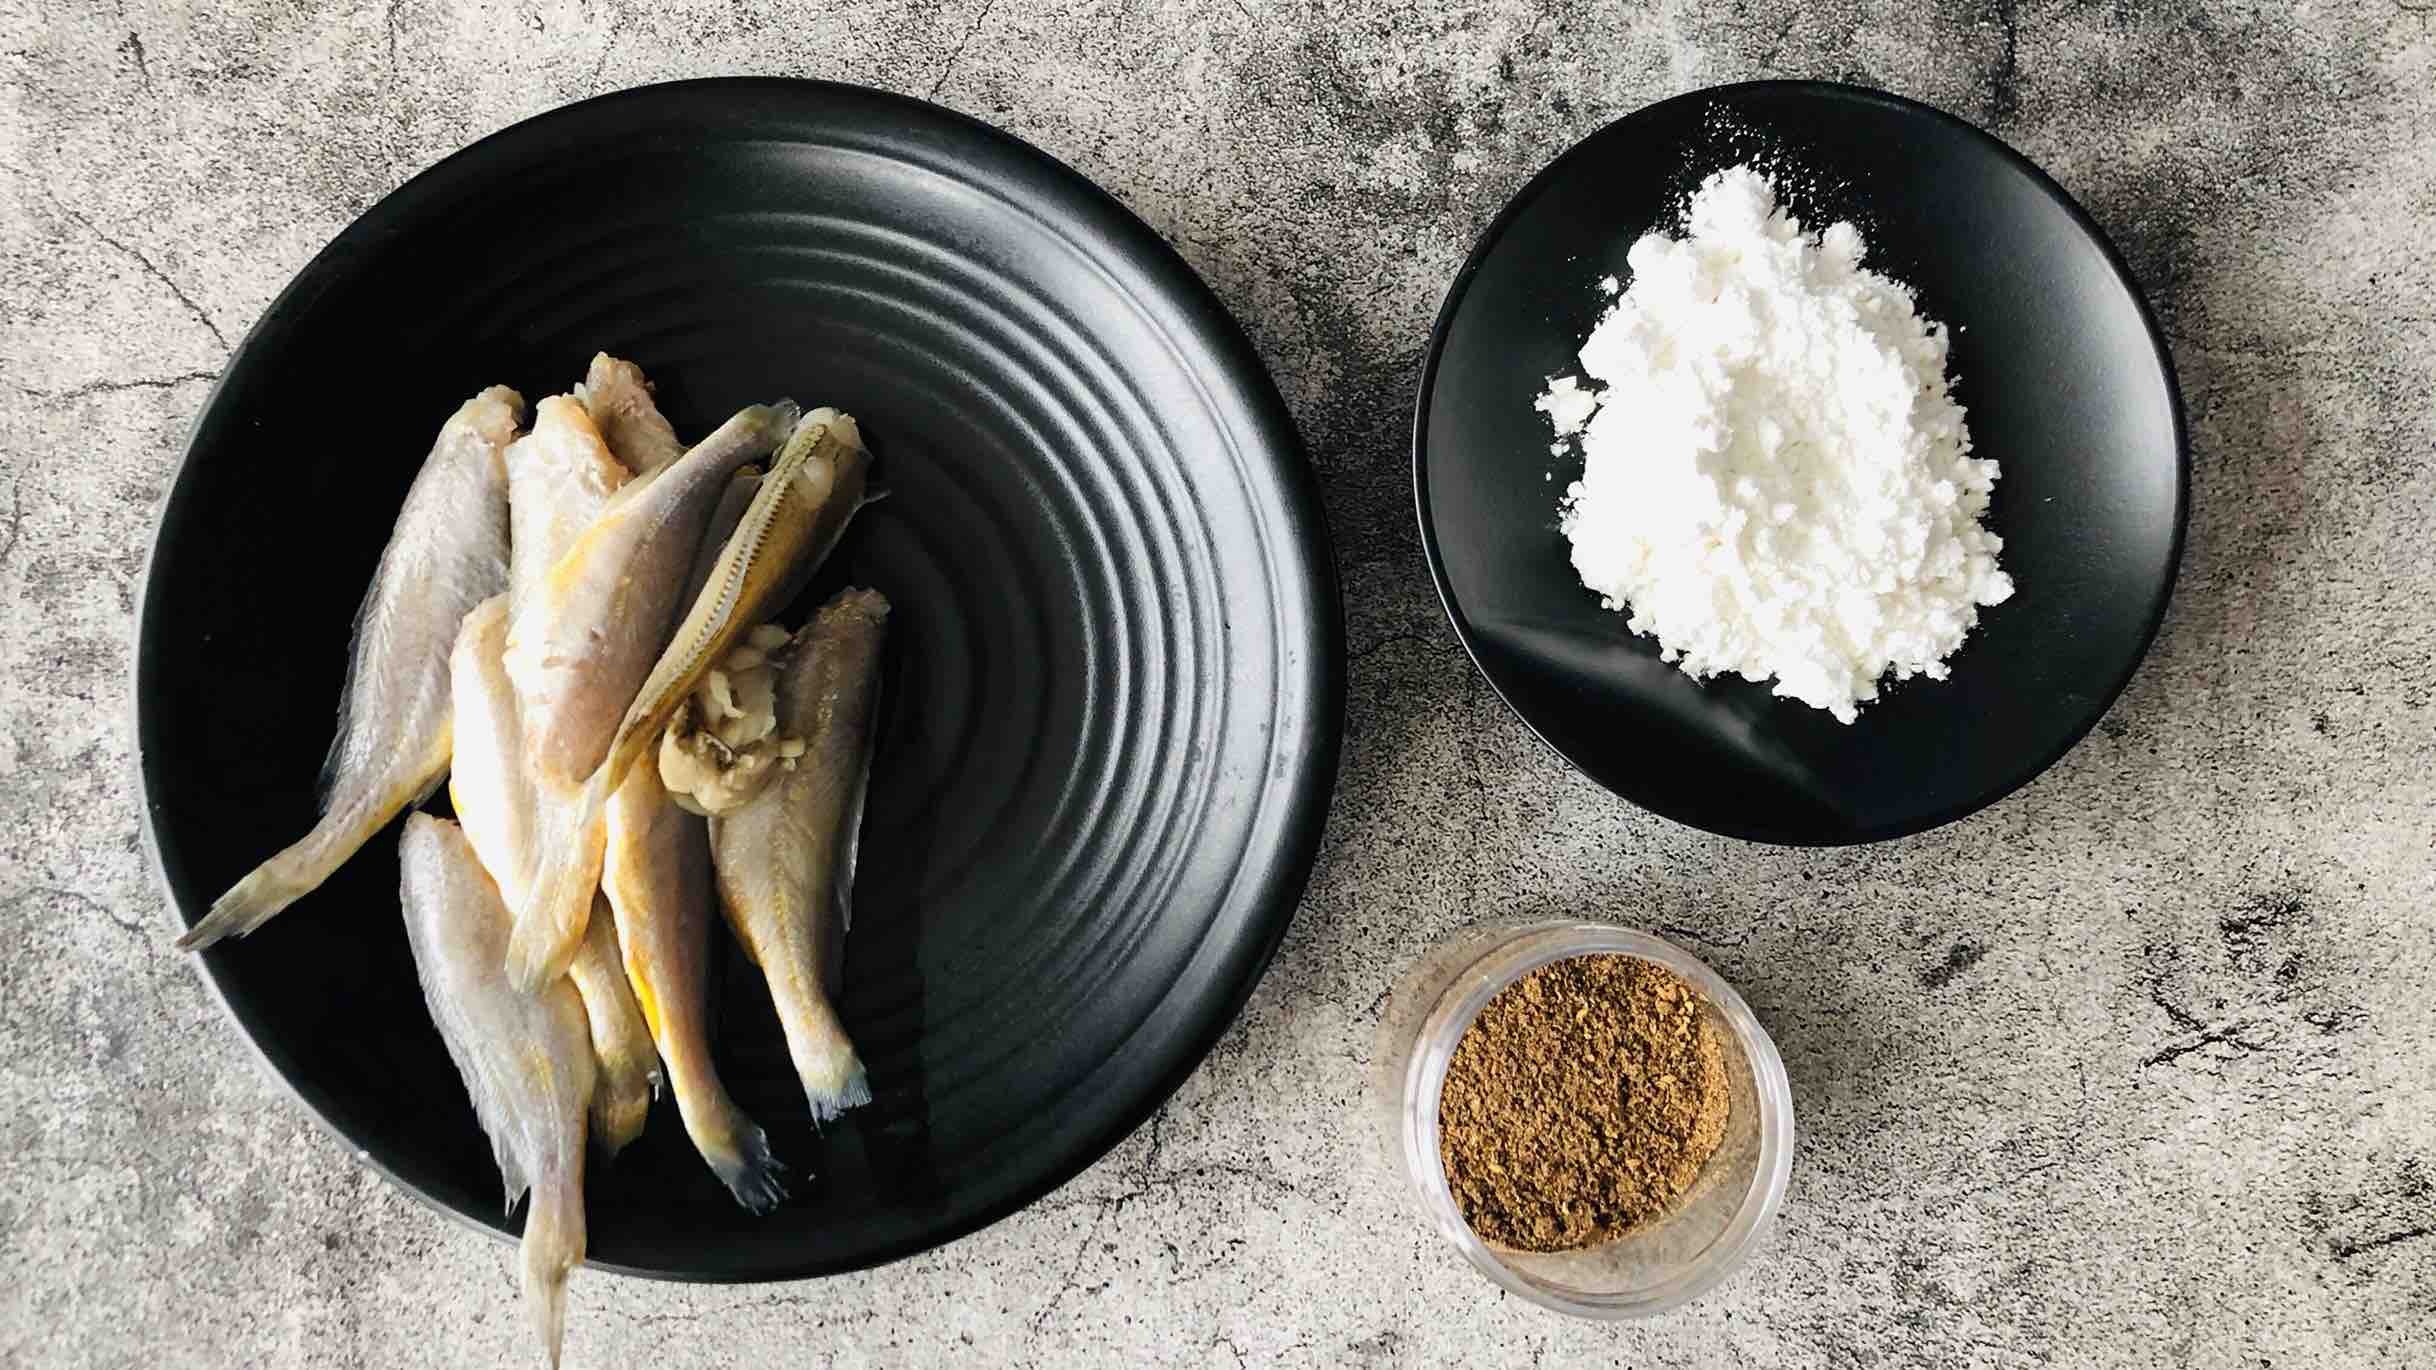 Salt and Pepper Small Yellow Croaker recipe